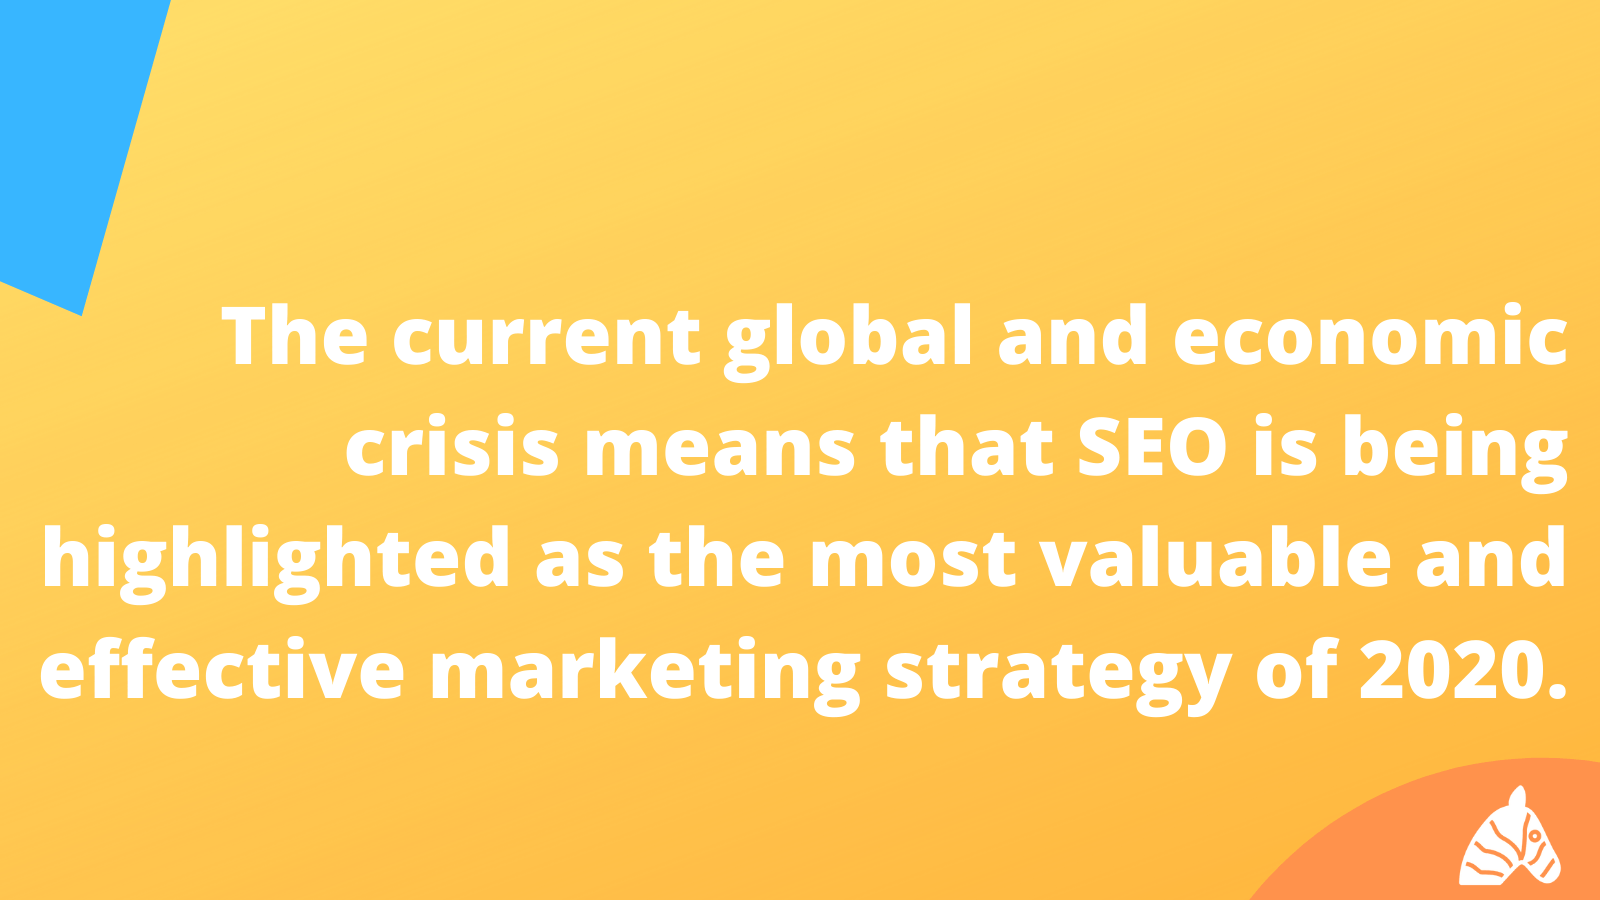 COVID-19 has highlighted the importance of SEO in an Holistic marketing plan